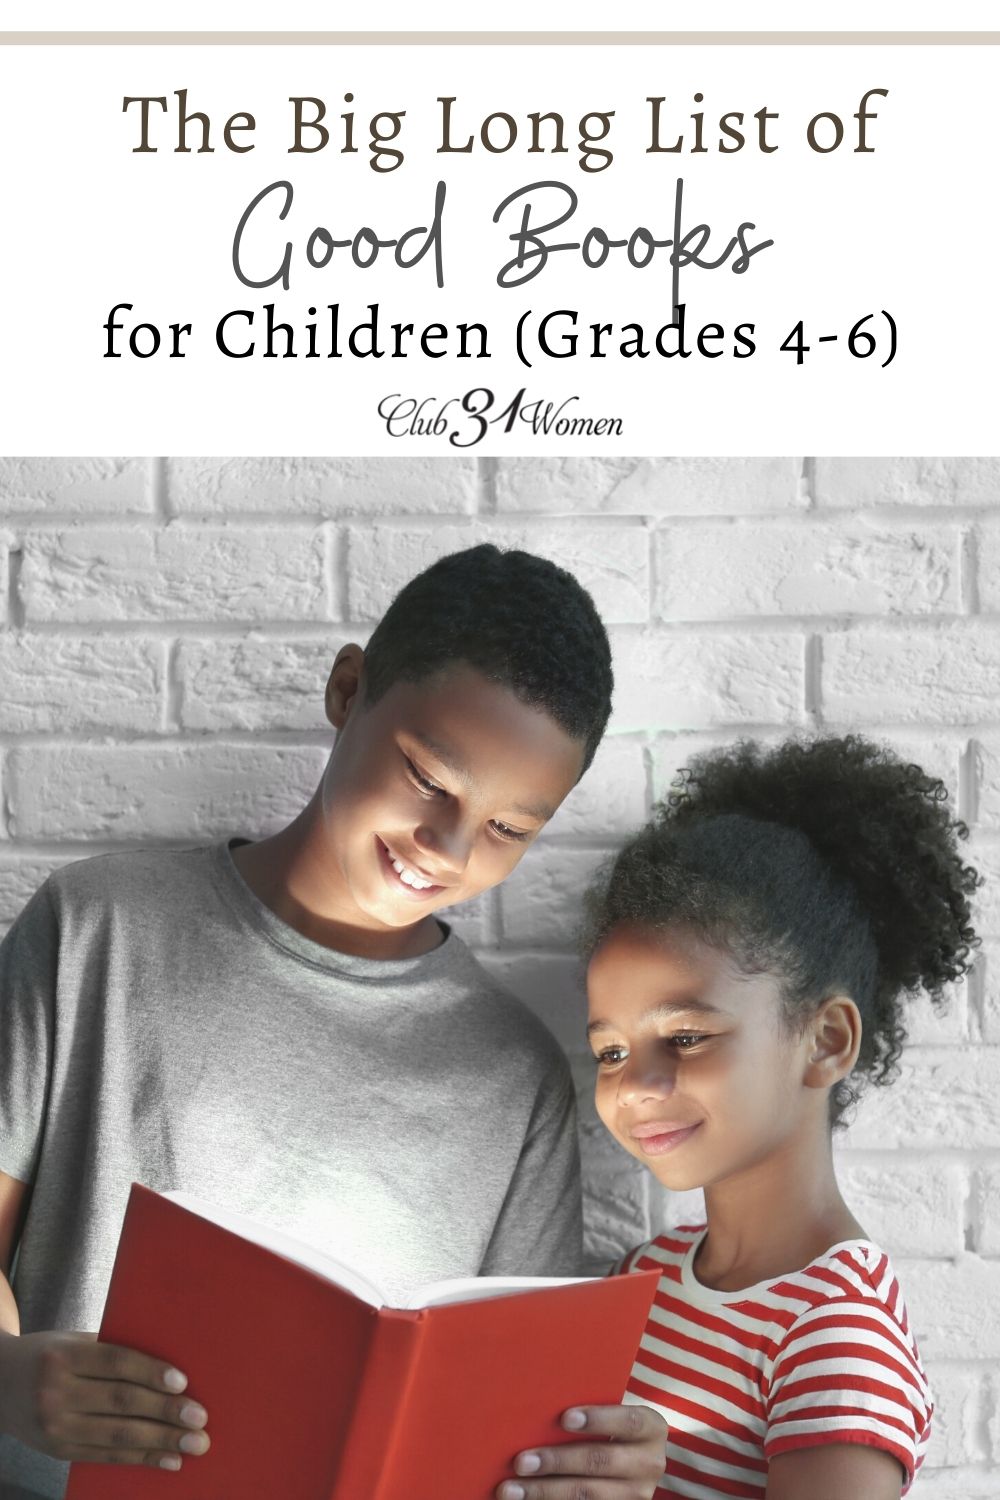 If you have a child who can't get enough good books to read, this is a Big Long List of Good Books for Children just for you! via @Club31Women